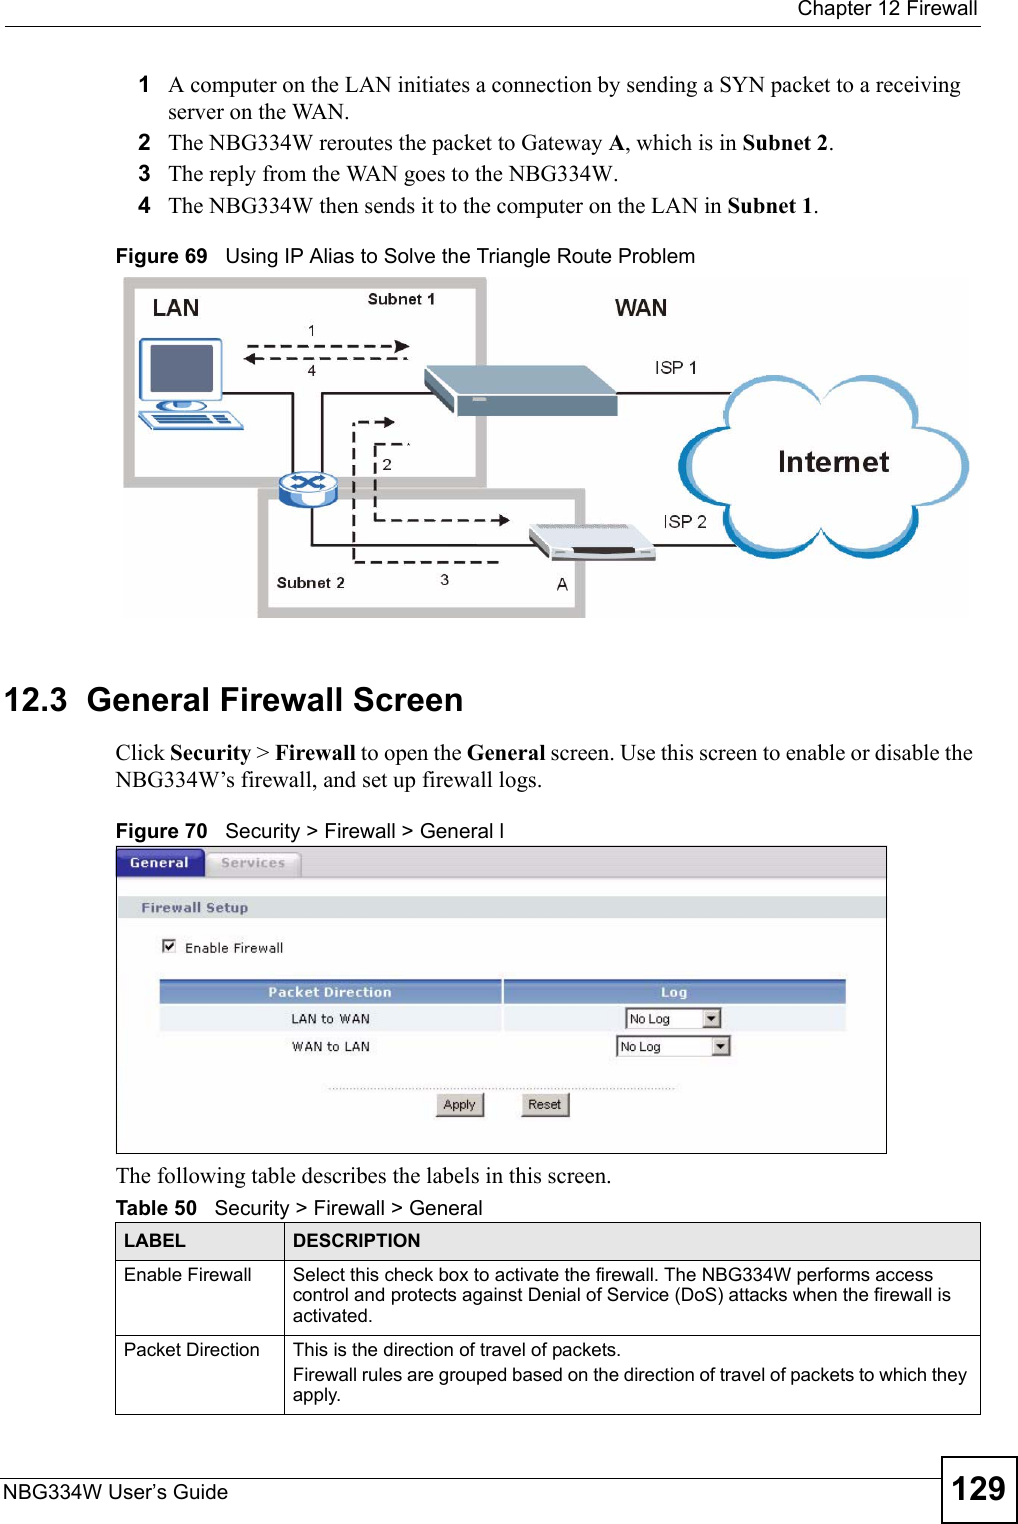  Chapter 12 FirewallNBG334W User’s Guide 1291A computer on the LAN initiates a connection by sending a SYN packet to a receiving server on the WAN.2The NBG334W reroutes the packet to Gateway A, which is in Subnet 2. 3The reply from the WAN goes to the NBG334W. 4The NBG334W then sends it to the computer on the LAN in Subnet 1. Figure 69   Using IP Alias to Solve the Triangle Route Problem12.3  General Firewall Screen   Click Security &gt; Firewall to open the General screen. Use this screen to enable or disable the NBG334W’s firewall, and set up firewall logs. Figure 70   Security &gt; Firewall &gt; General lThe following table describes the labels in this screen.Table 50   Security &gt; Firewall &gt; General LABEL DESCRIPTIONEnable Firewall Select this check box to activate the firewall. The NBG334W performs access control and protects against Denial of Service (DoS) attacks when the firewall is activated.Packet Direction This is the direction of travel of packets.Firewall rules are grouped based on the direction of travel of packets to which they apply. 